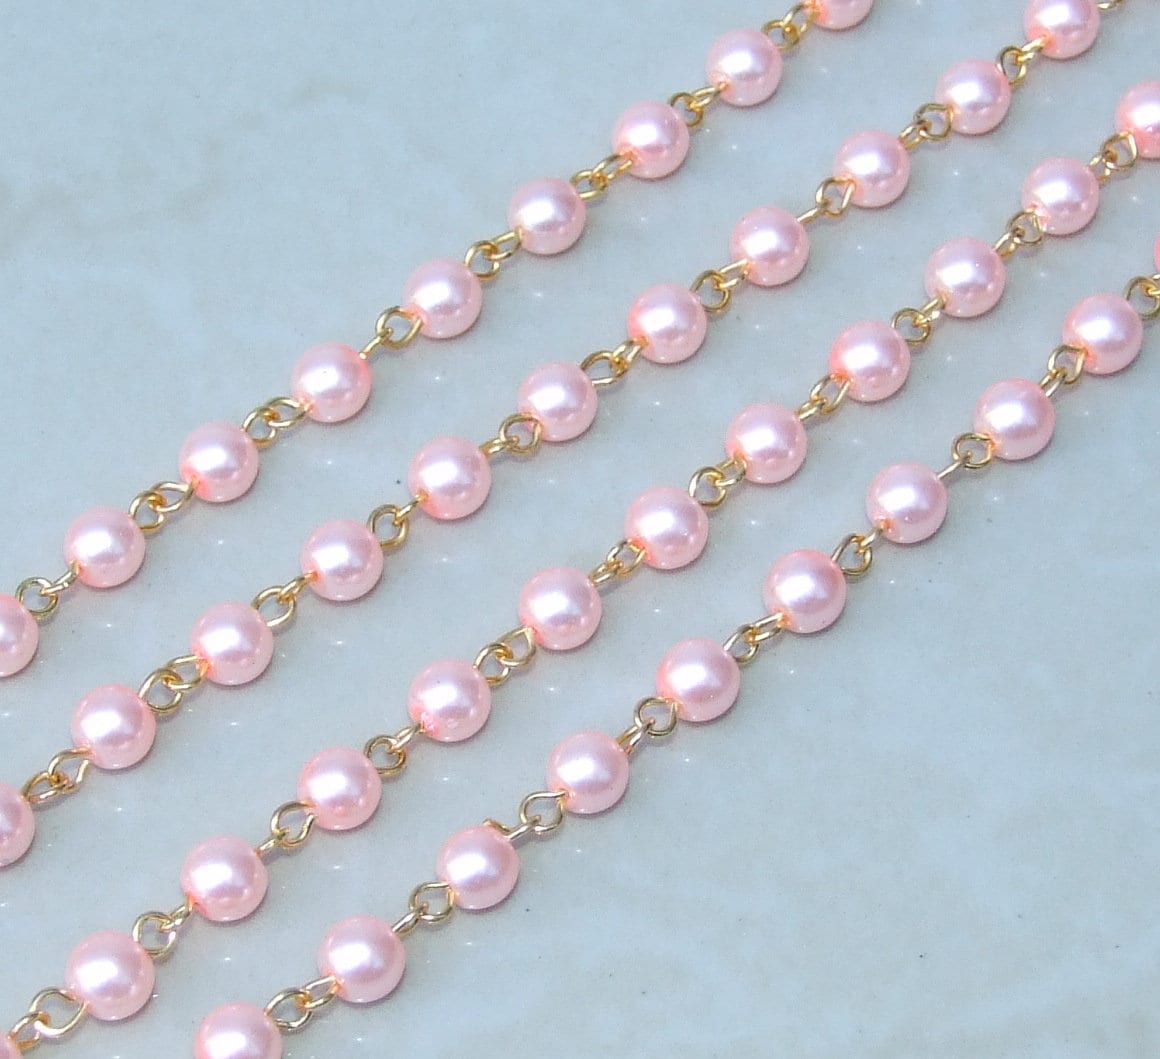 Pink Pearl Rosary Chain, 1 Meter, Bulk Chain, Round Glass Beads, Beaded Chain, Body Chain, Gold Chain, Necklace Chain, Belly Chain, 6mm, 604